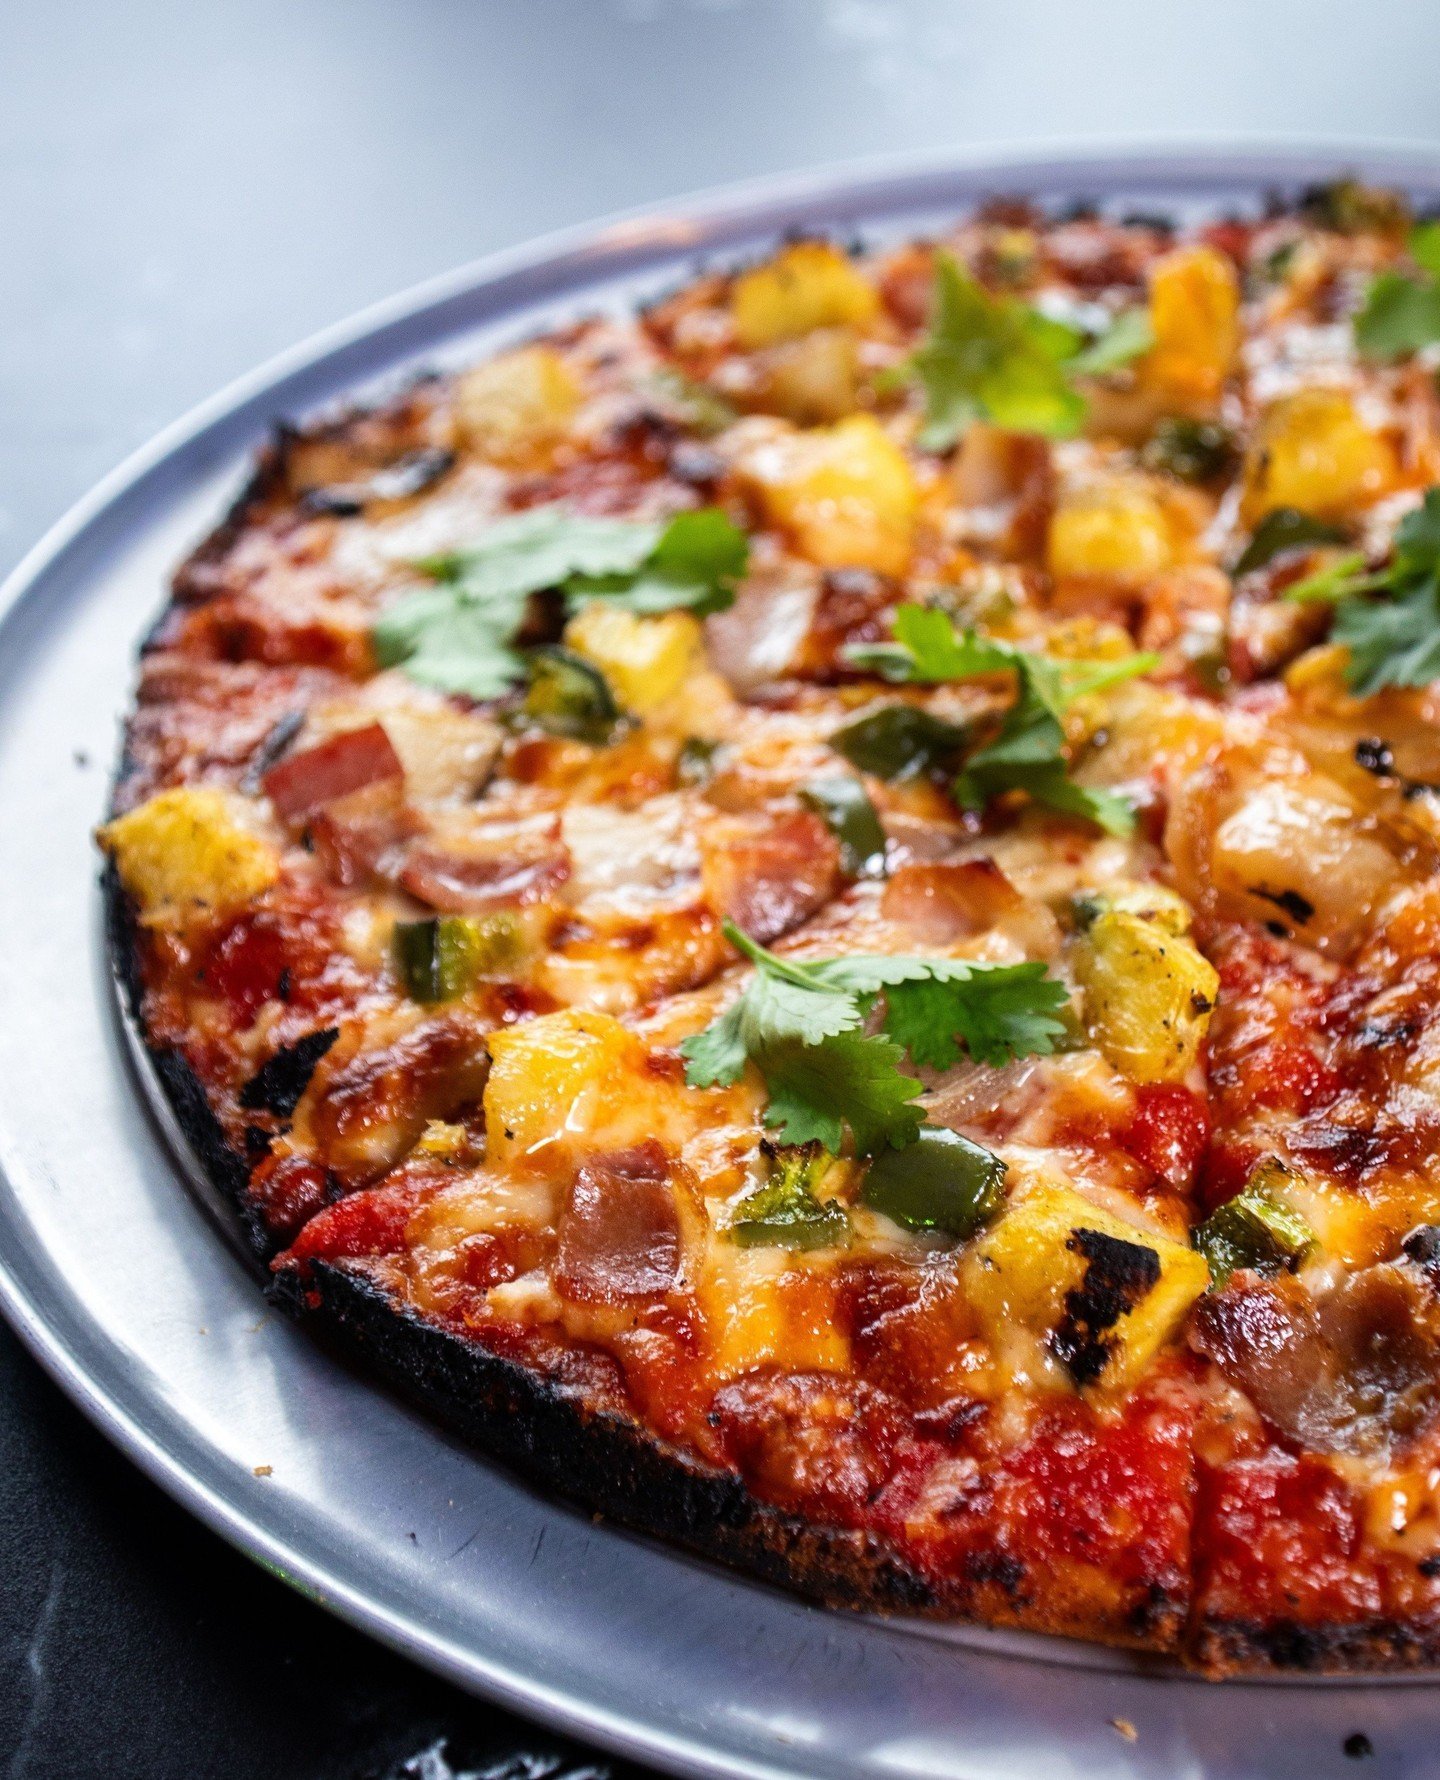 Our Pineapple, Bacon &amp; Jalapeno pizza: a sweet, savory, and spicy treat in the form of a bar pie.⁠
⁠
#pineappleonpizza #pineapplepizza #mainefoodie #nhfoodie #massfoodies